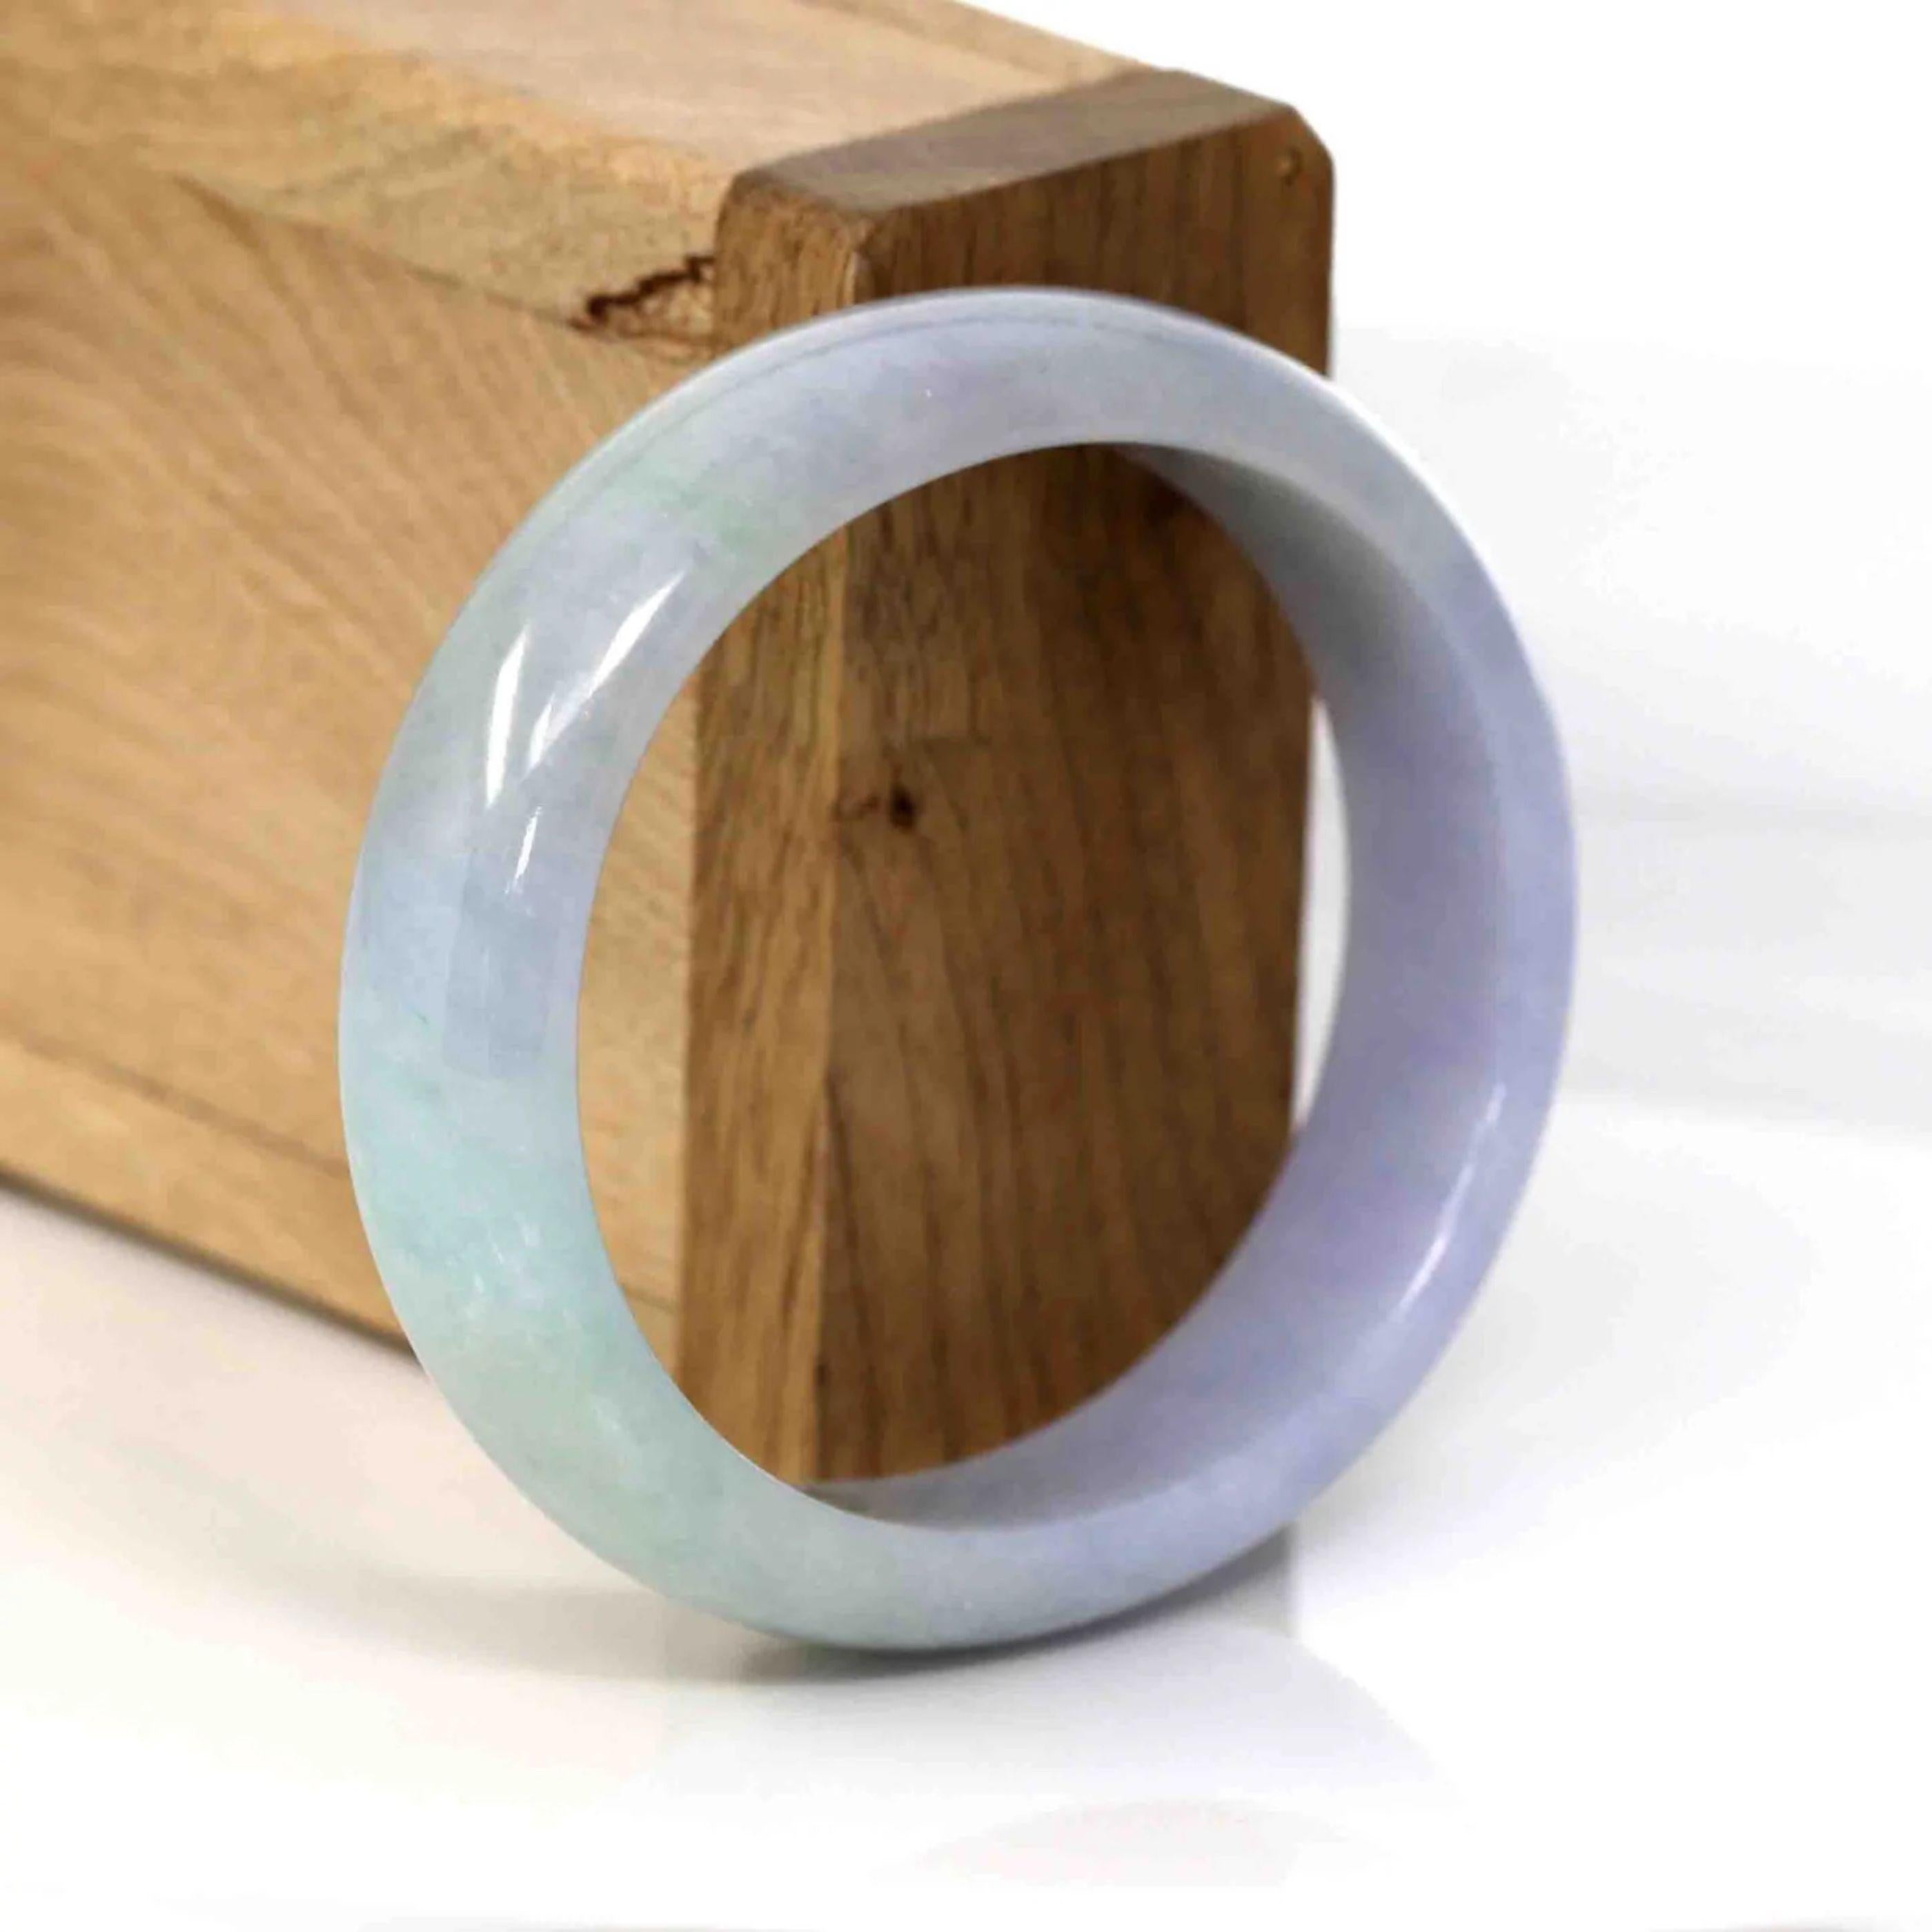 * DETAILS--- Genuine Burmese Jadeite Jade Oval Bangle Bracelet. This oval bangle is made with fine genuine Burmese purple lavender Jadeite jade. The jade texture is very good and smooth. It is a very luxurious purple-lavender color. Looks so